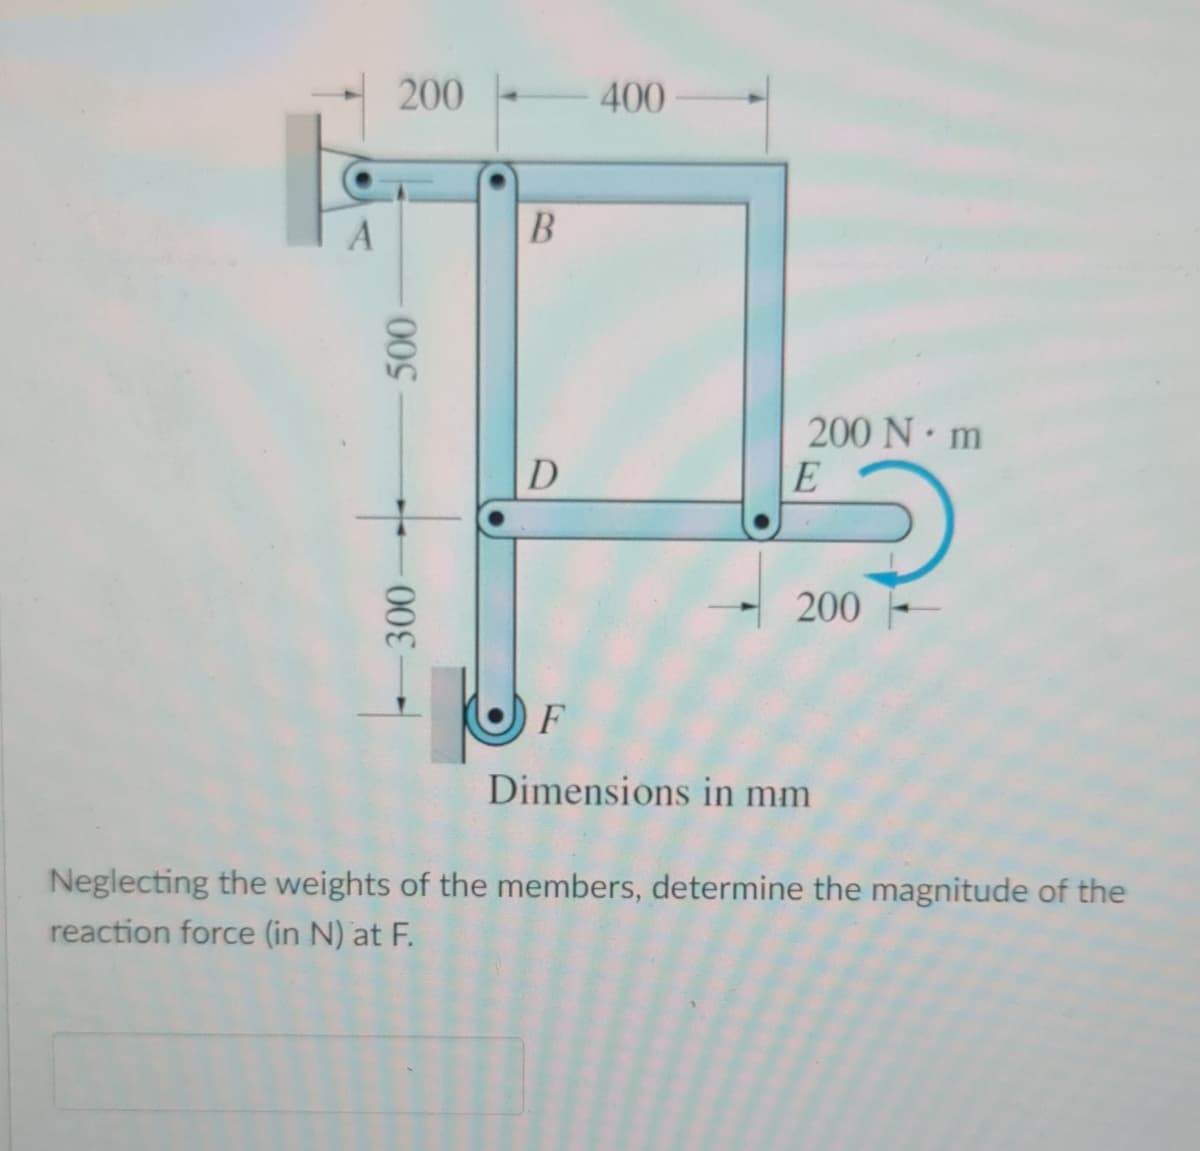 200-
400
200 N m
D
E
200
Dimensions in mm
Neglecting the weights of the members, determine the magnitude of the
reaction force (in N) at F.
300
000
